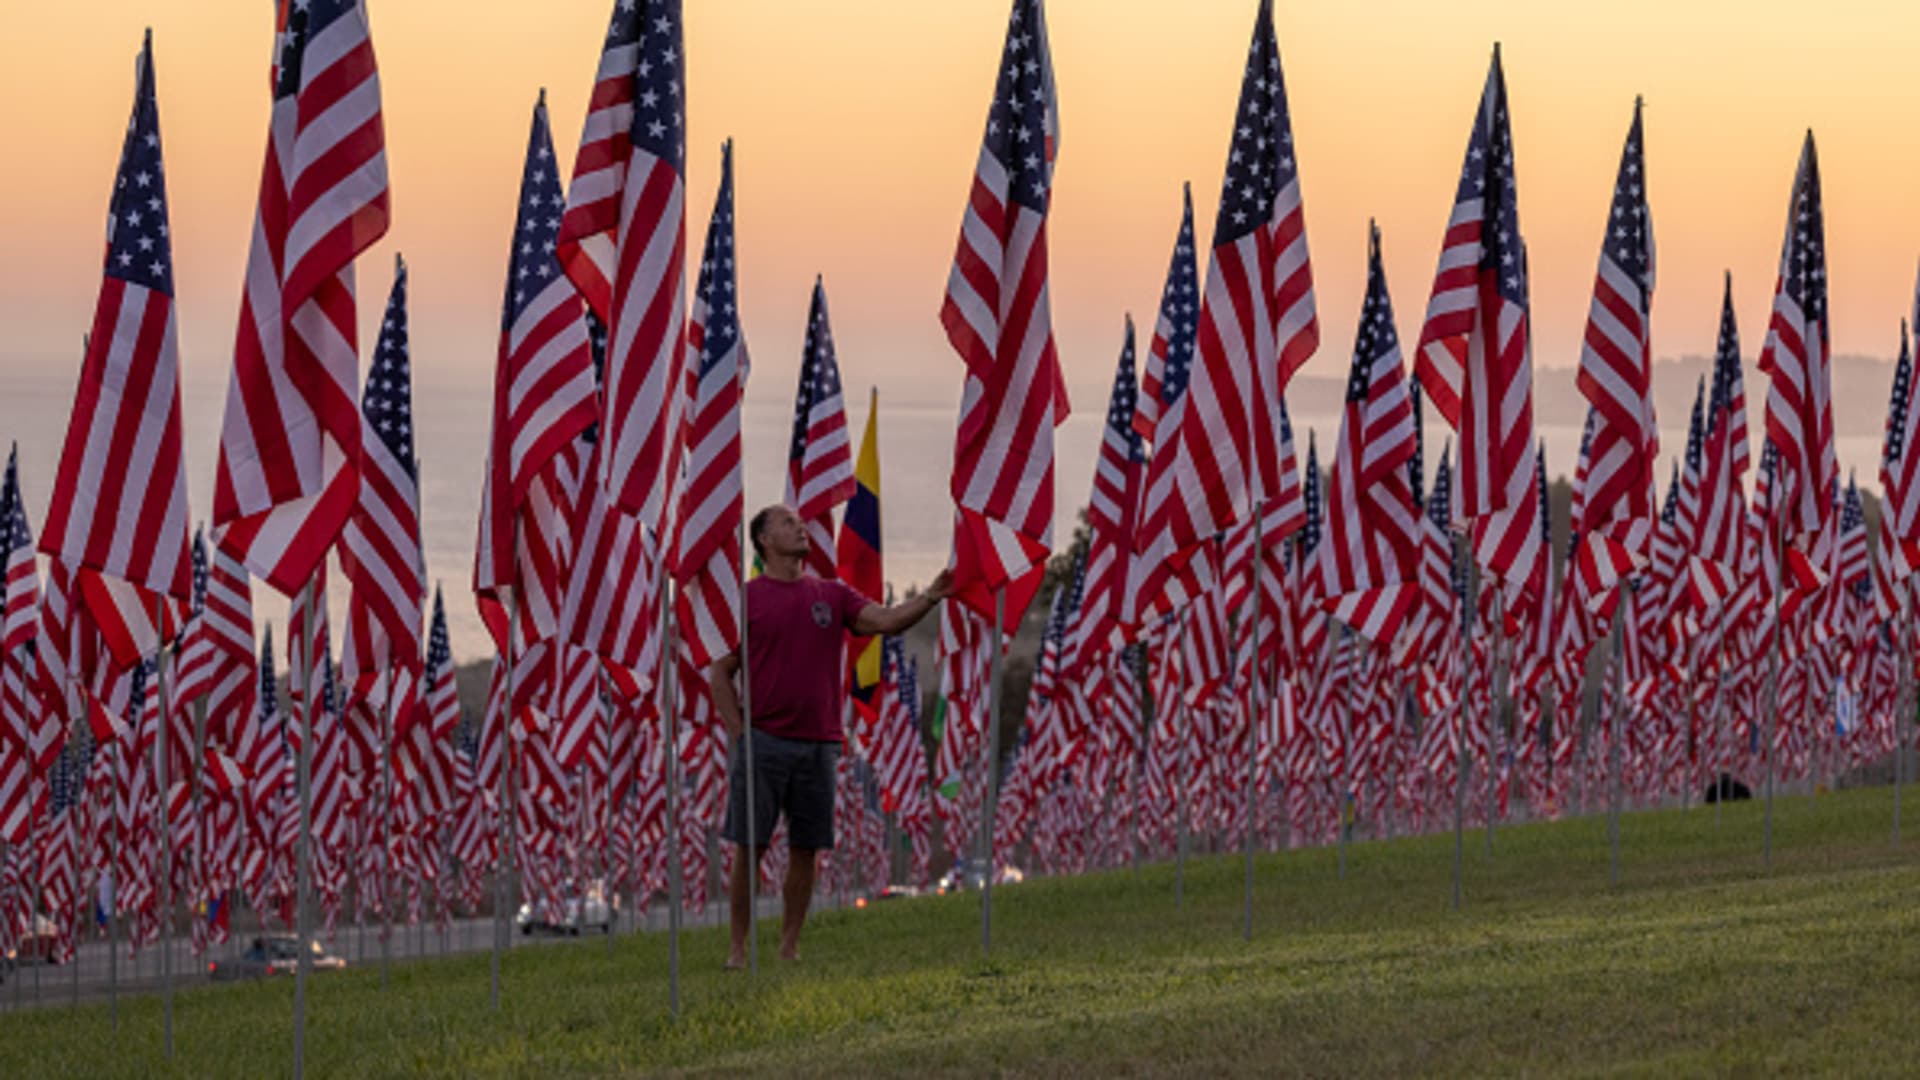 A man touches a flag during the 14th annual Waves of Flags on the eve of the 20th anniversary of the September 11 terror attacks in Alumni Park at Pepperdine University on September 10, 2021 in Malibu, California.